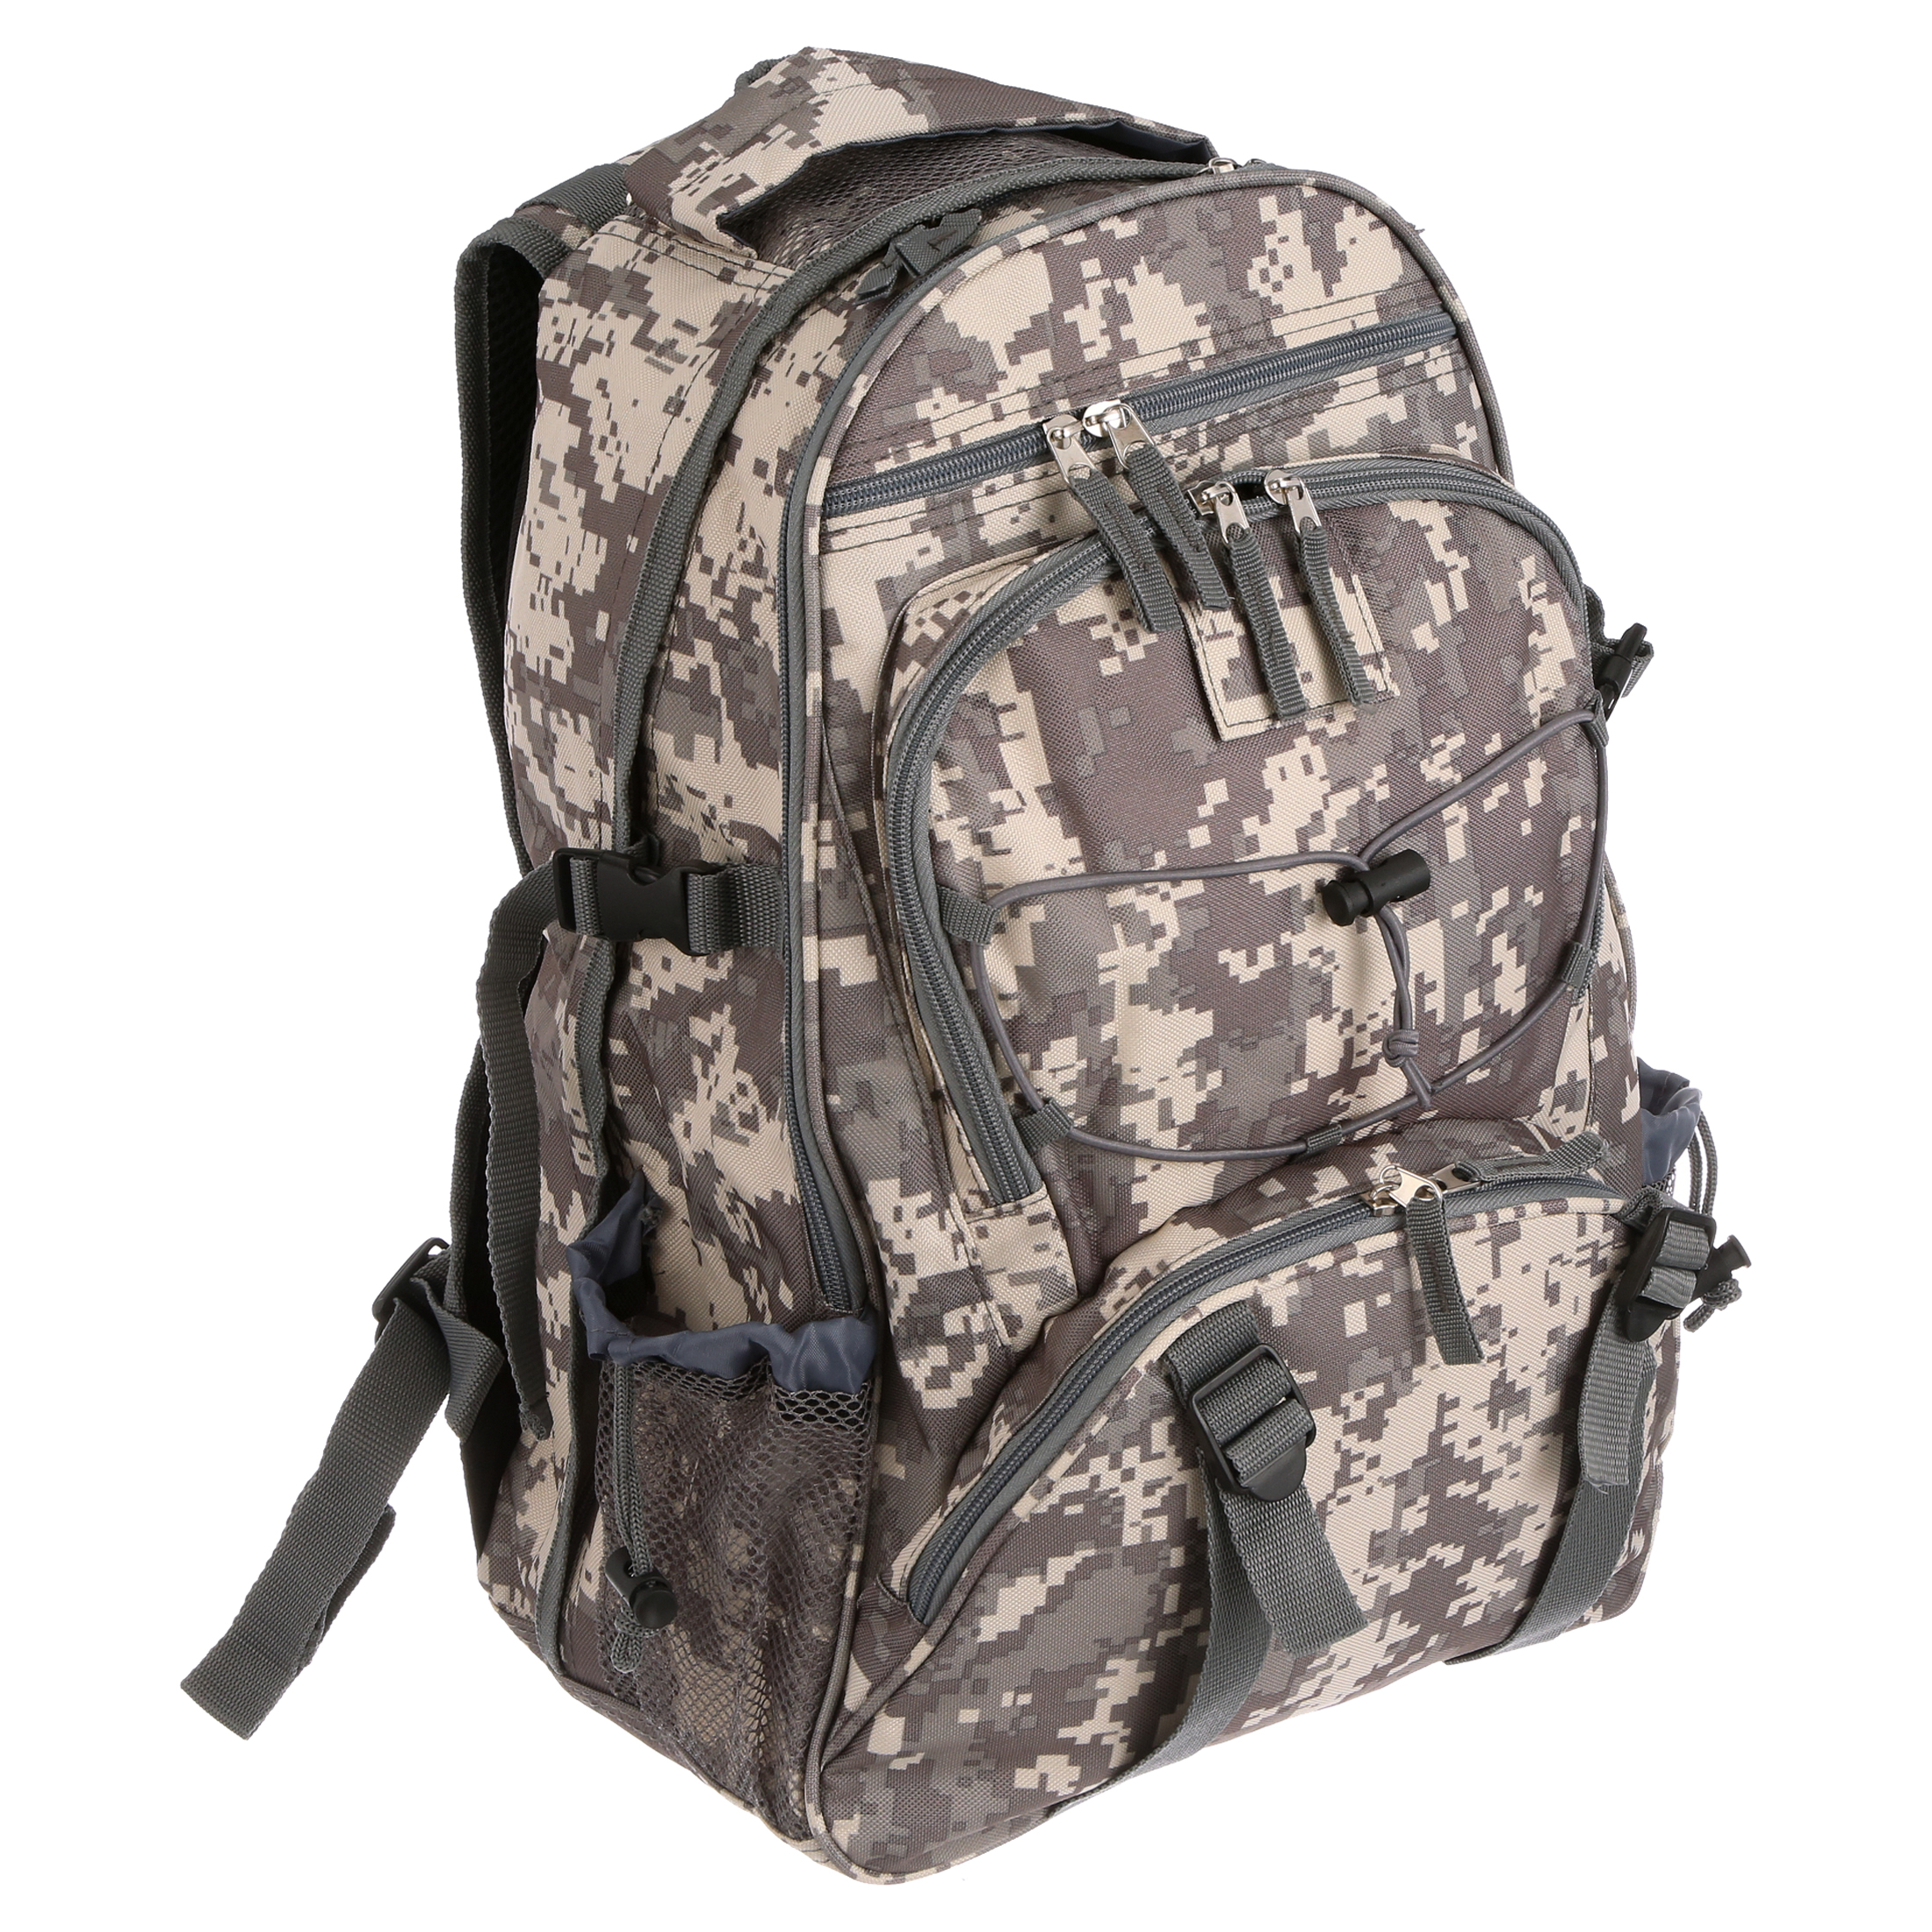 Readywise 5-Day Survival Backpack - Camo - image 2 of 11